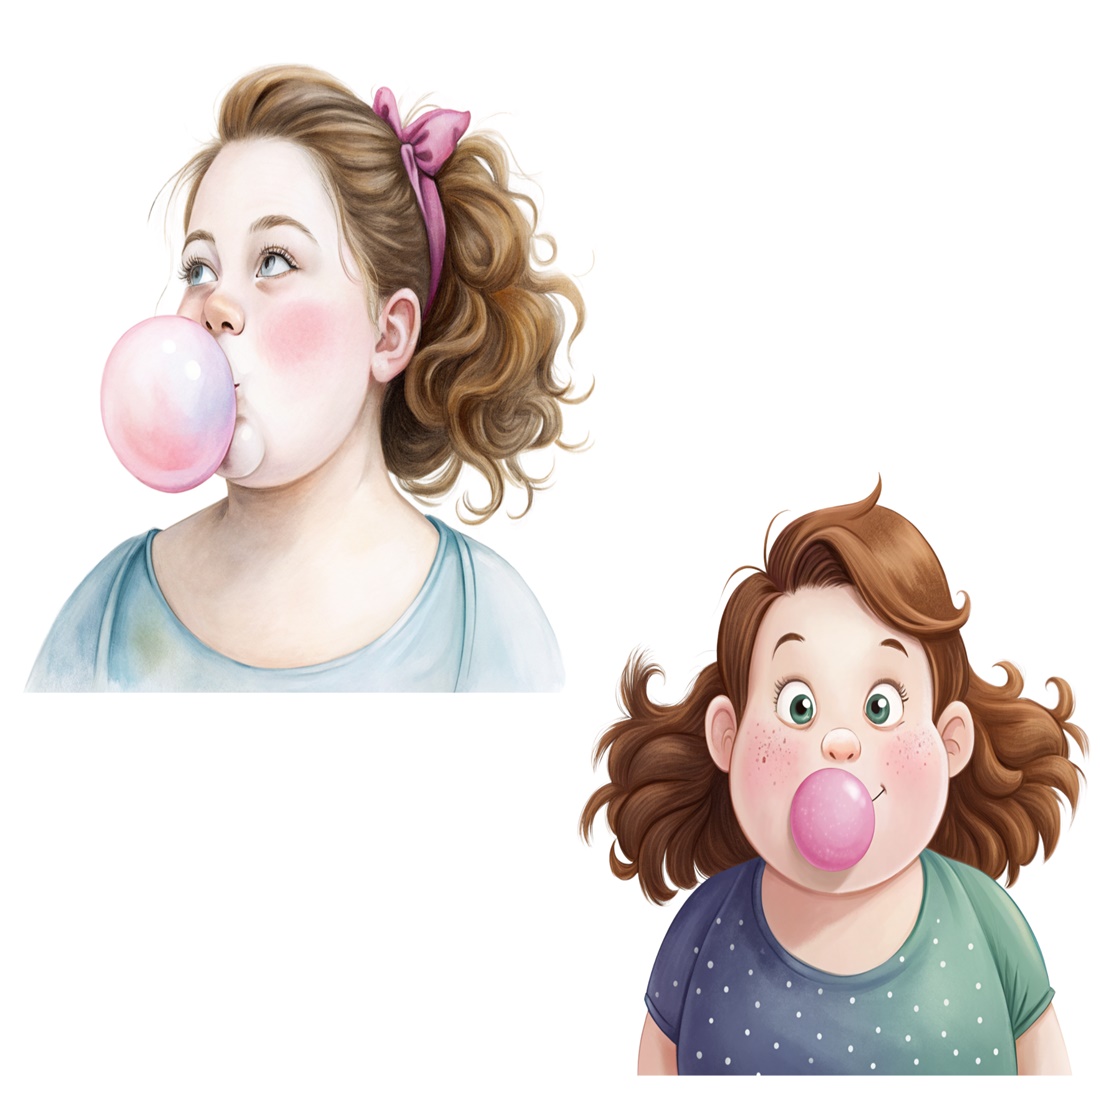 Cheerful girl blowing bubble gum, Fun clipart, Cheerful clipart, Self love clipart, Body positivity, Vector clipart, 6 transparent PNG preview image.